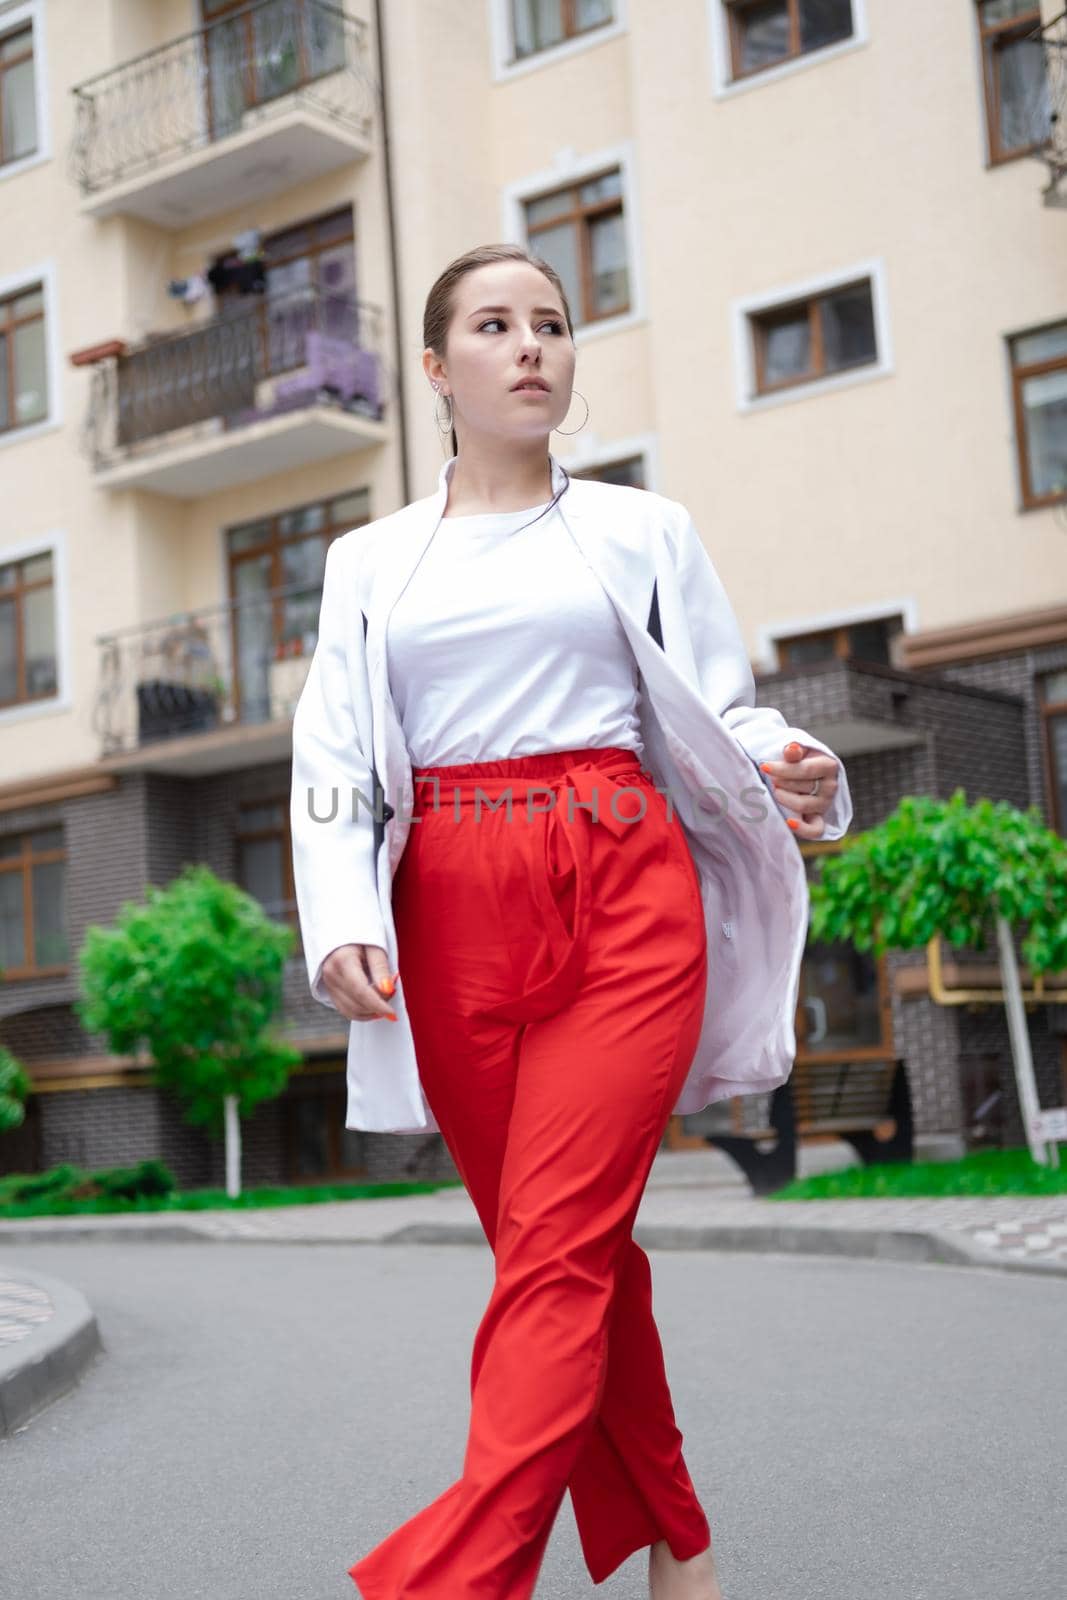 confident brunette woman in red pants and white blouse and jacket walking in the street.